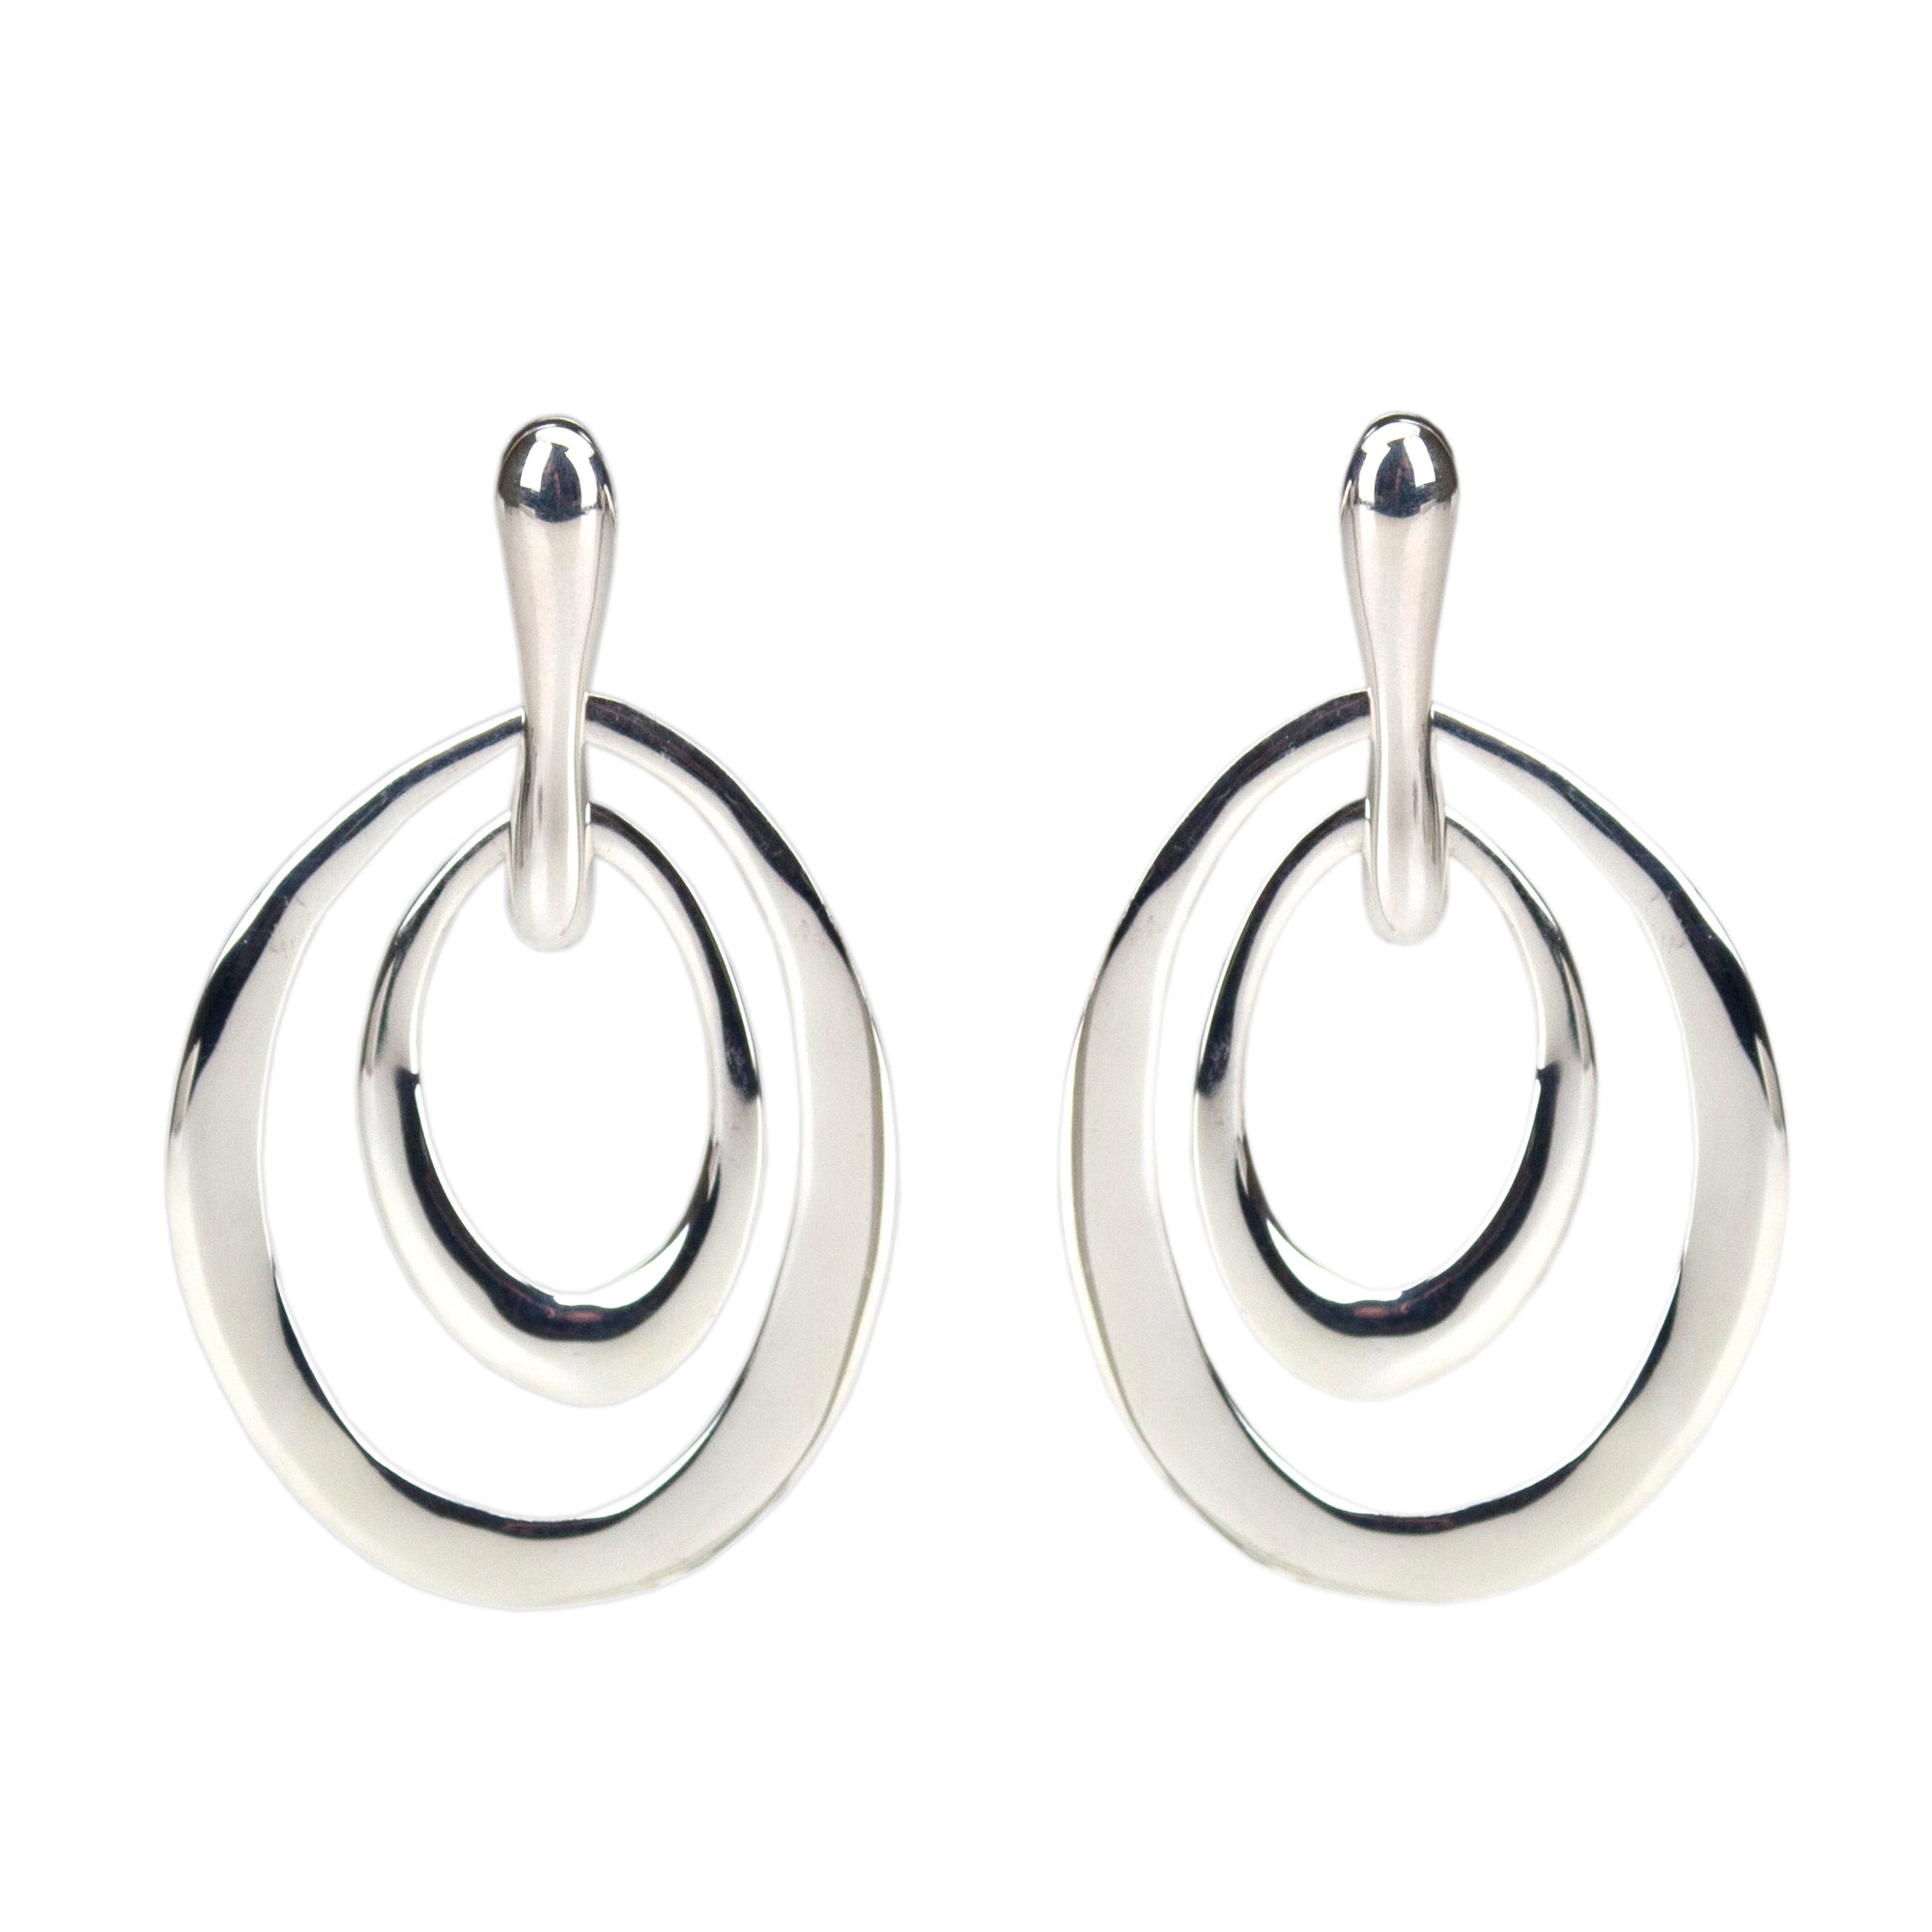 Highly polished sterling silver nested elliptical shapes Antonia Scales jewellery